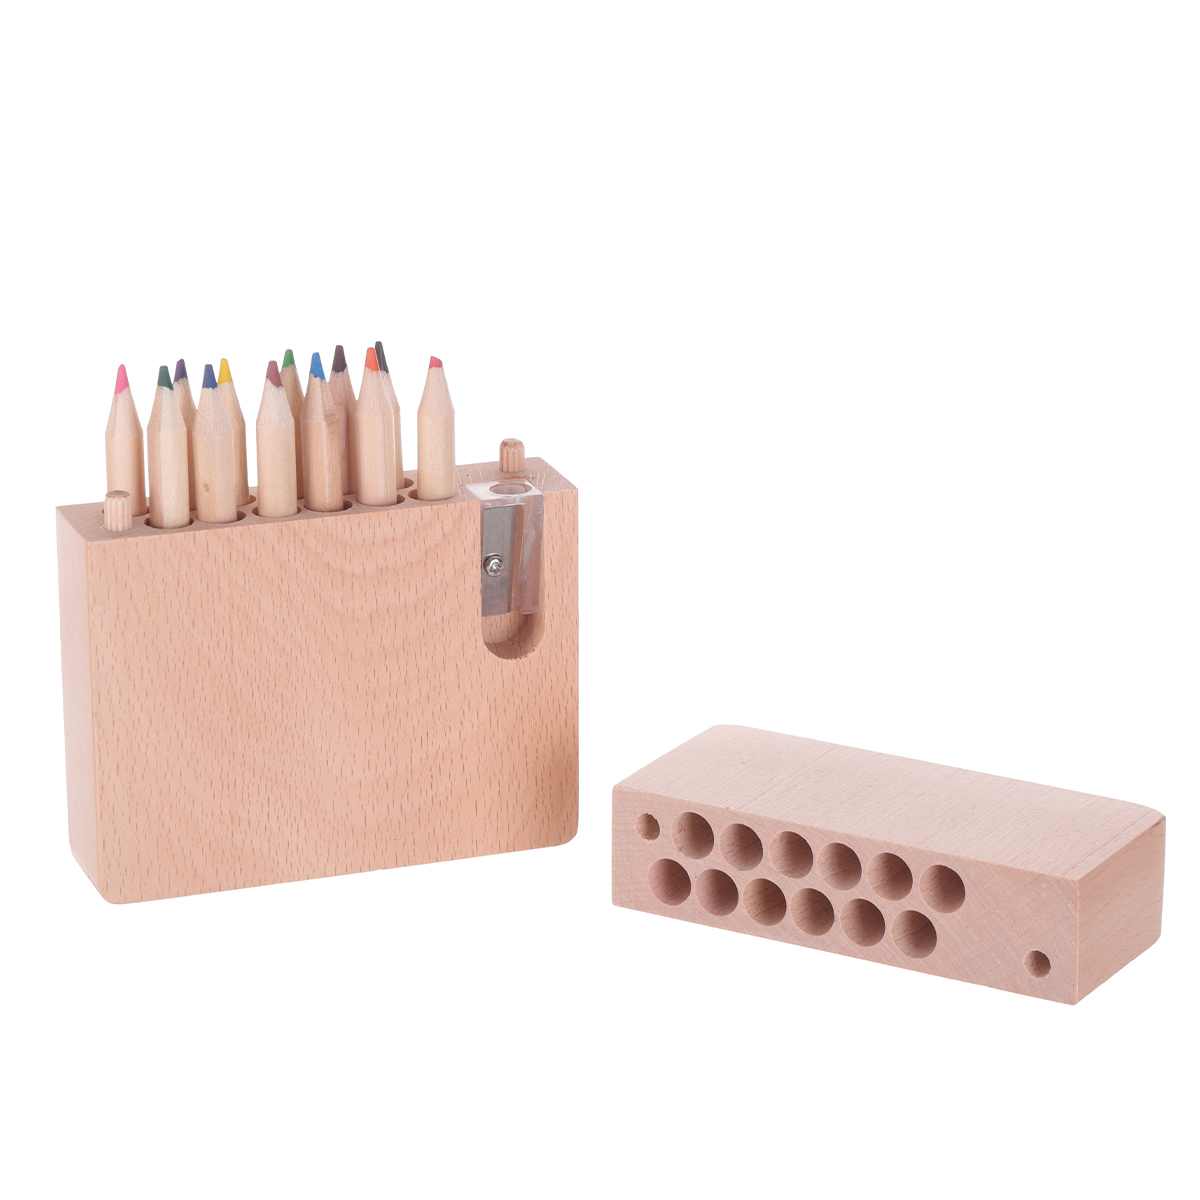 

Miniso Wooden Box 12 Pcs Colored Pencils with Pencil Sharpener